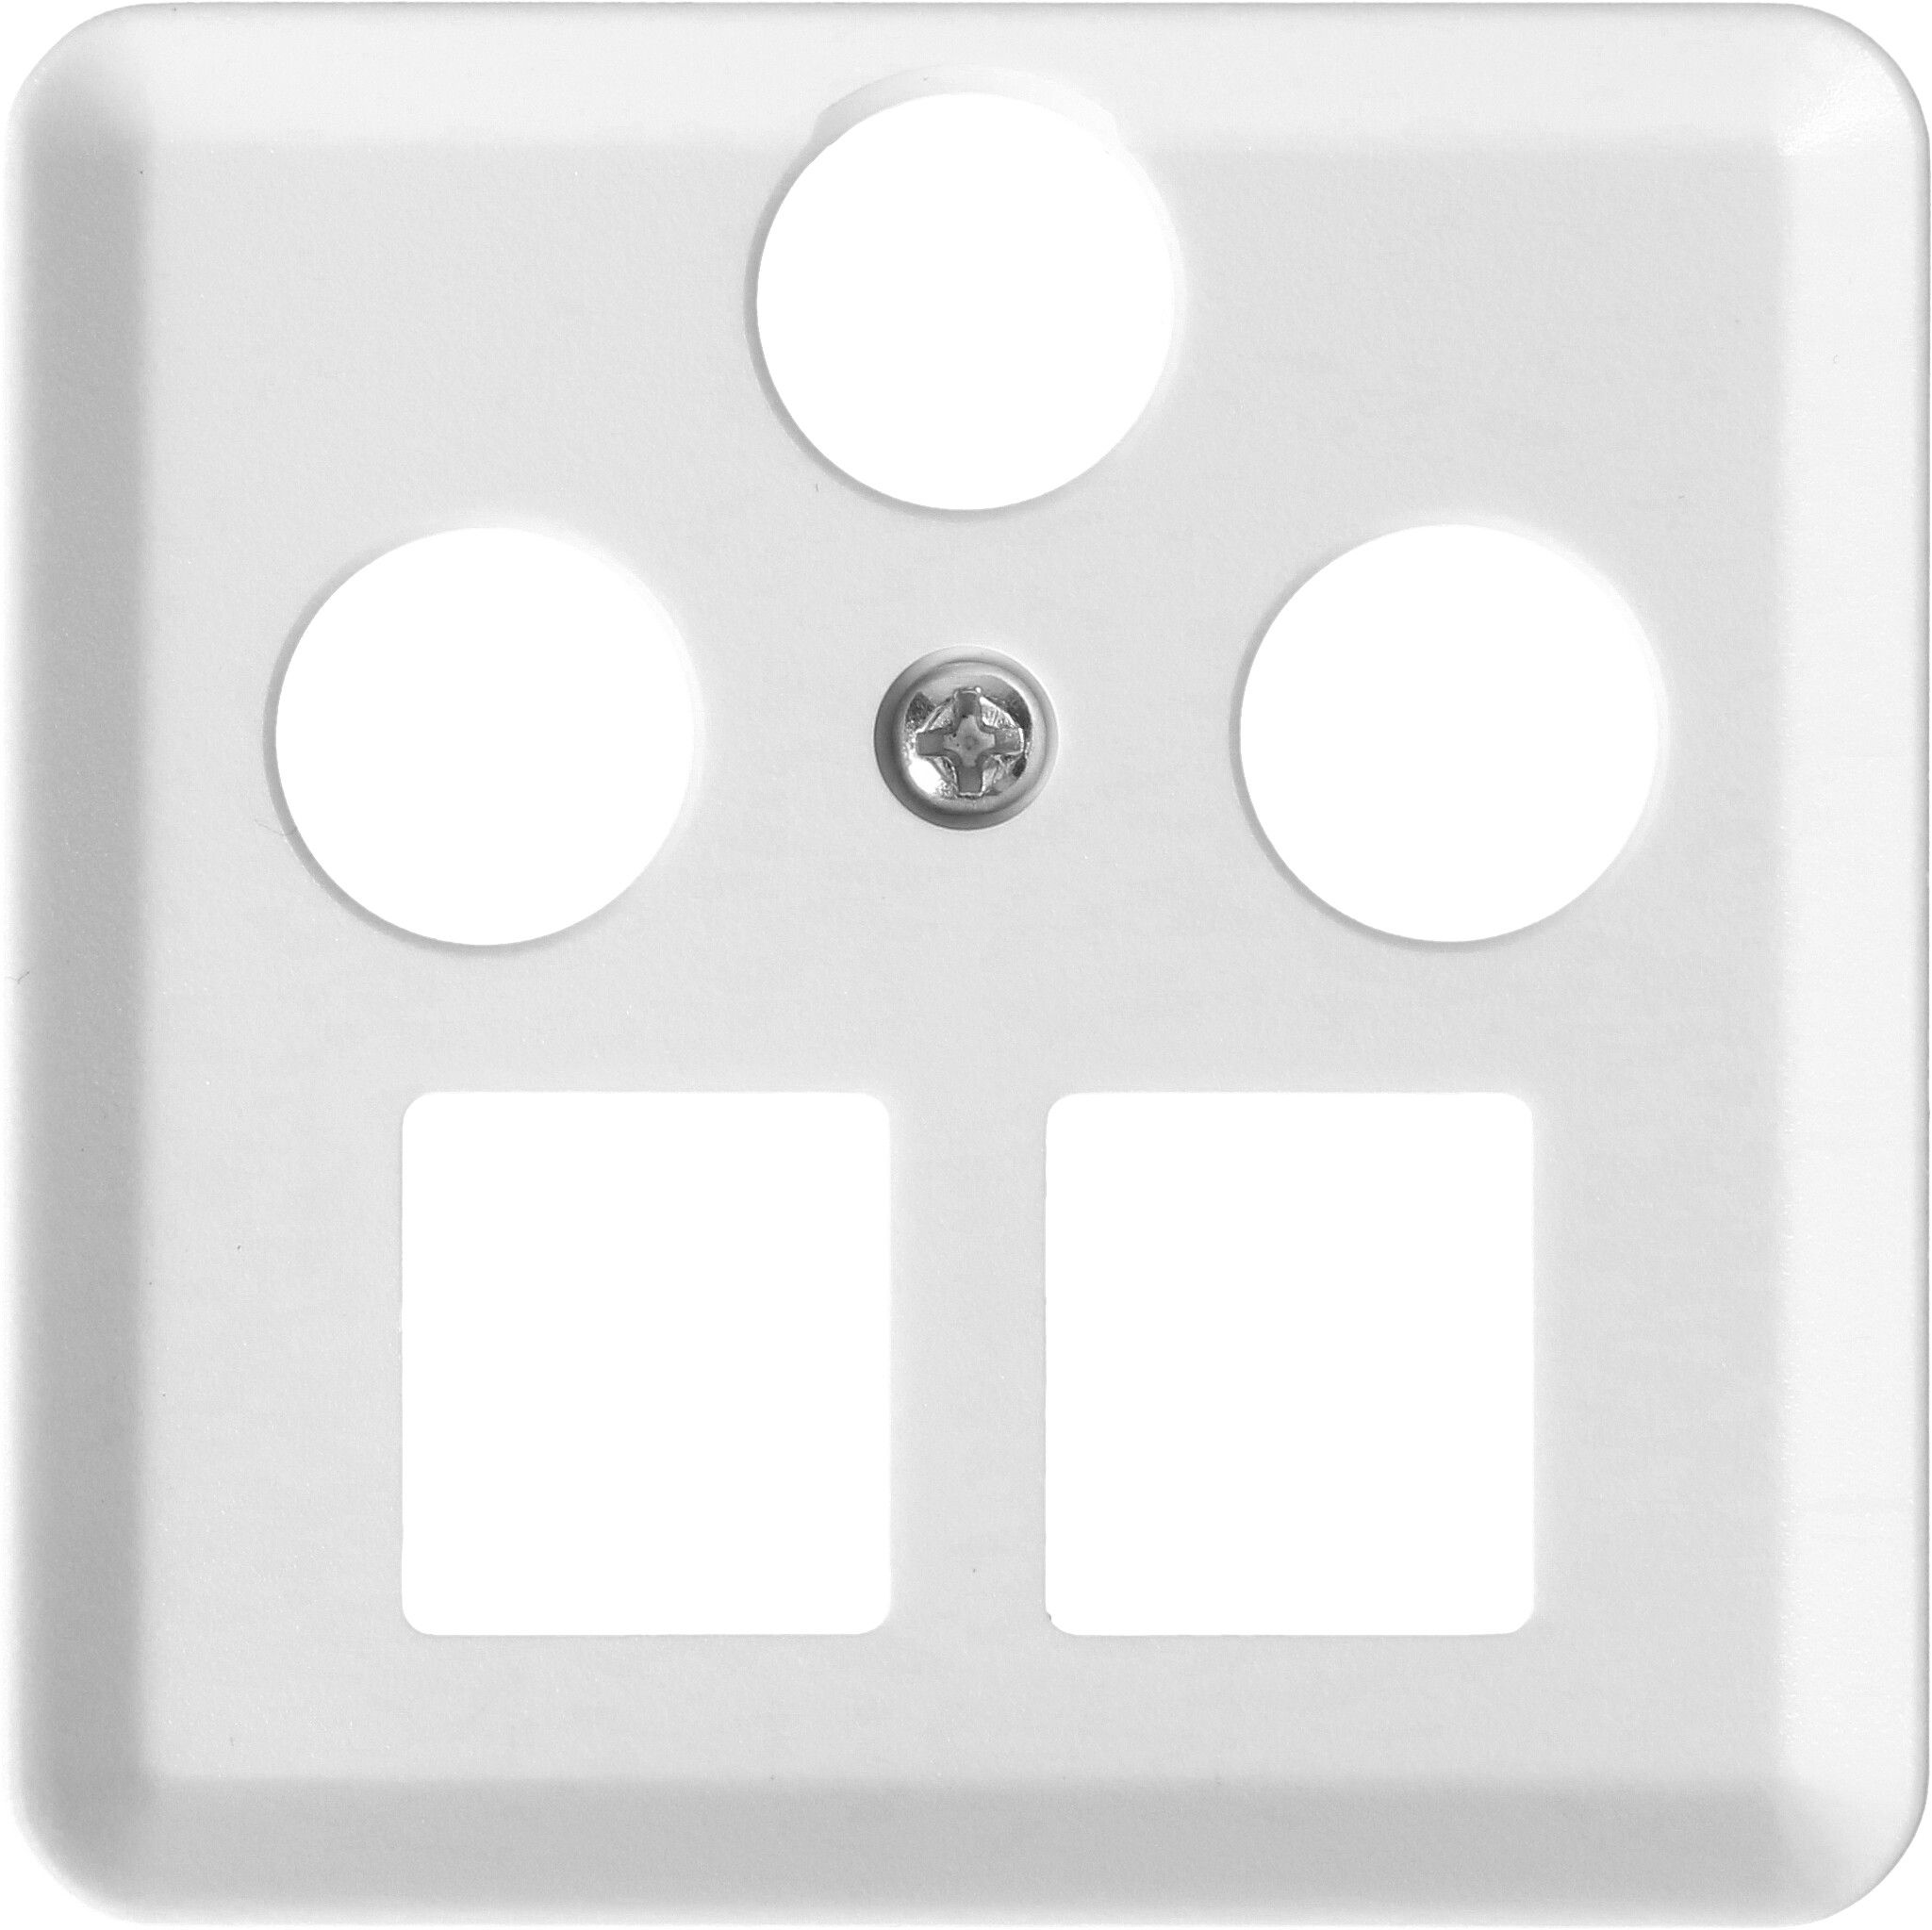 Front plate Multimedia white, priamos